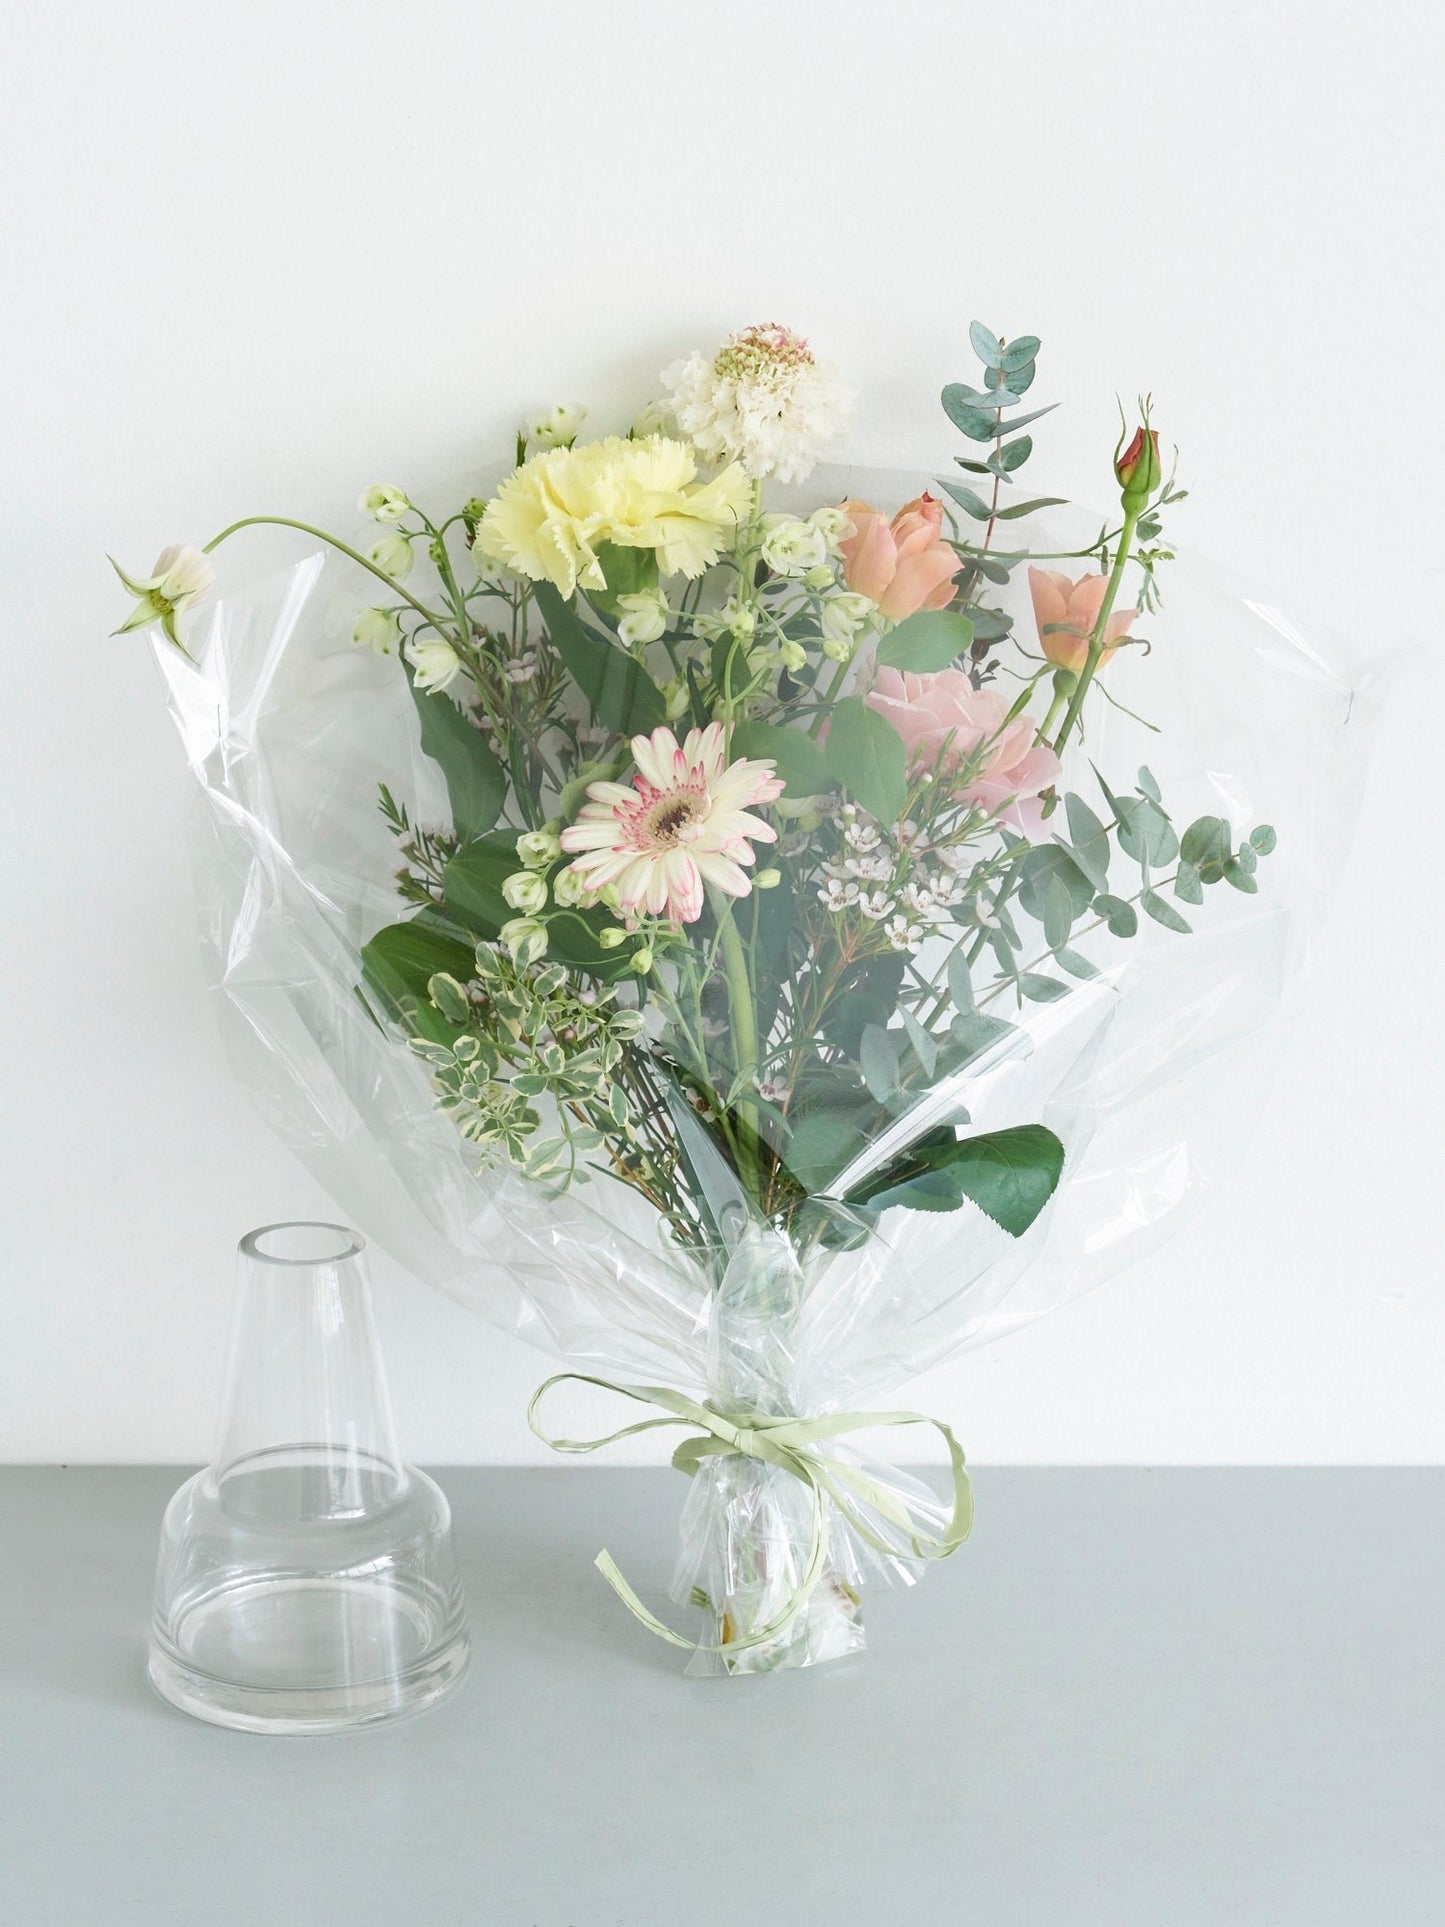 【mother's day】Set of bouquet S and clear vase 【Delivery date: 5/12 (Sun)】